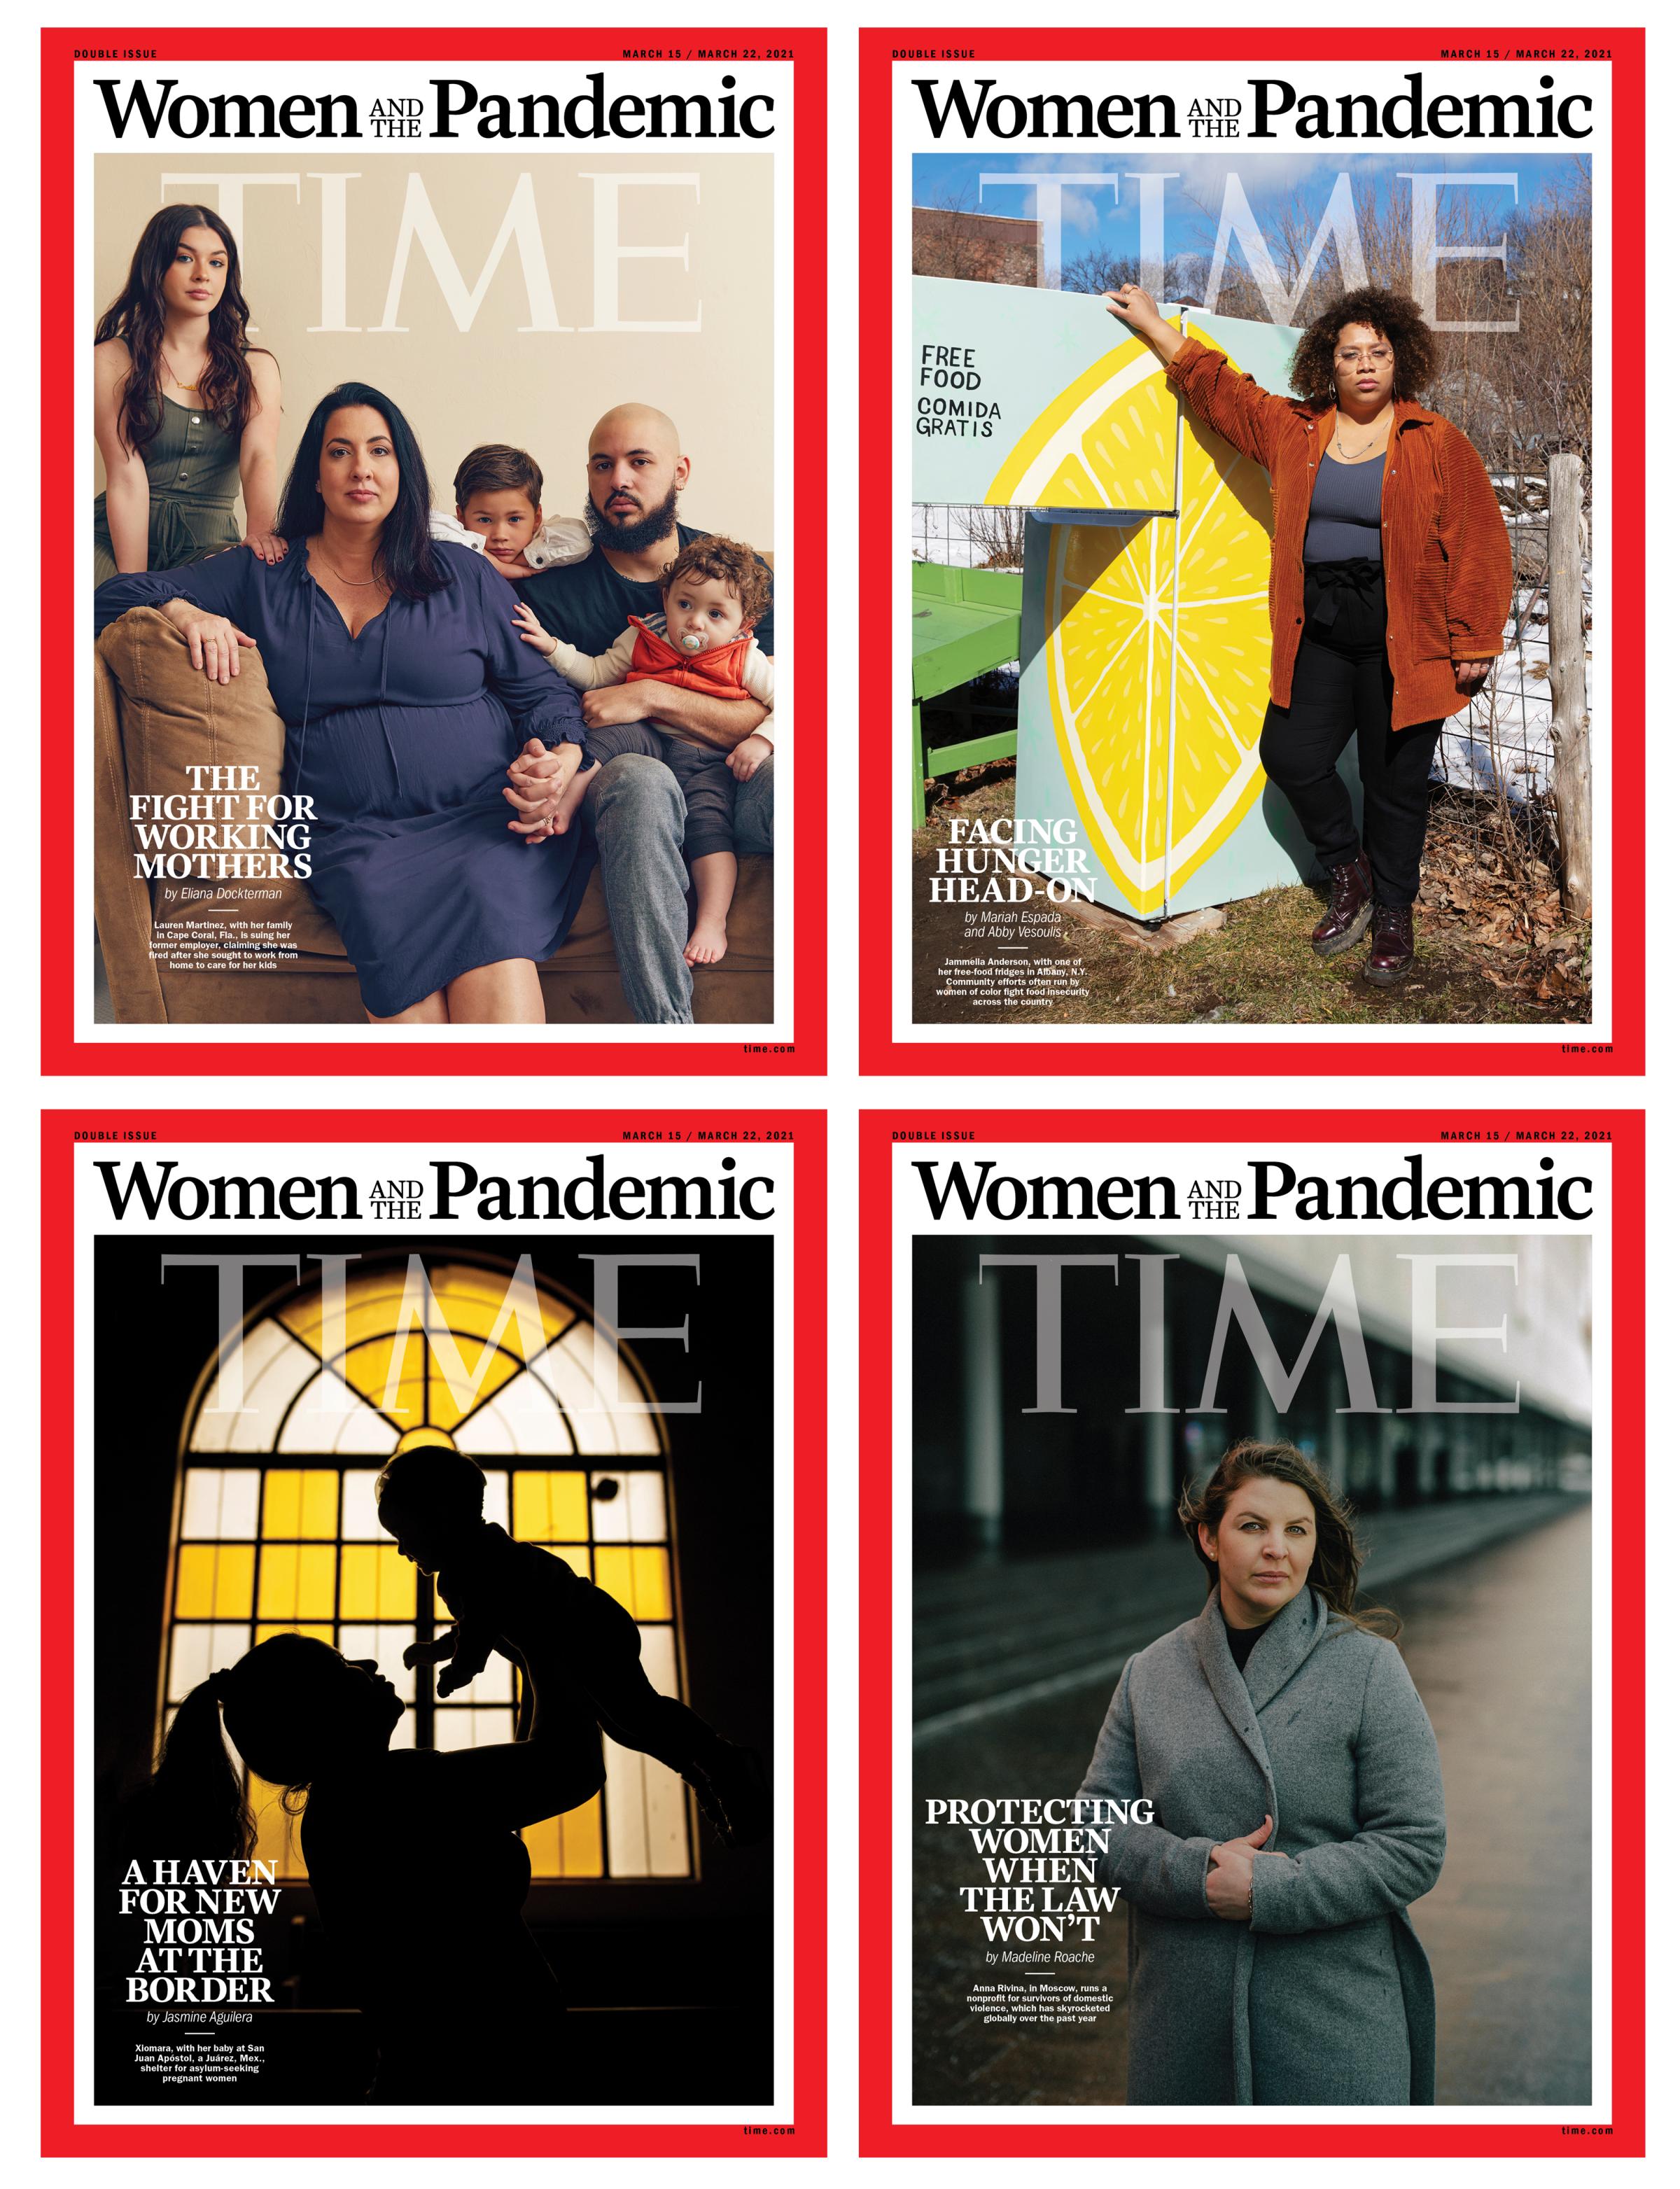 Women and the Pandemic Time Magazine covers